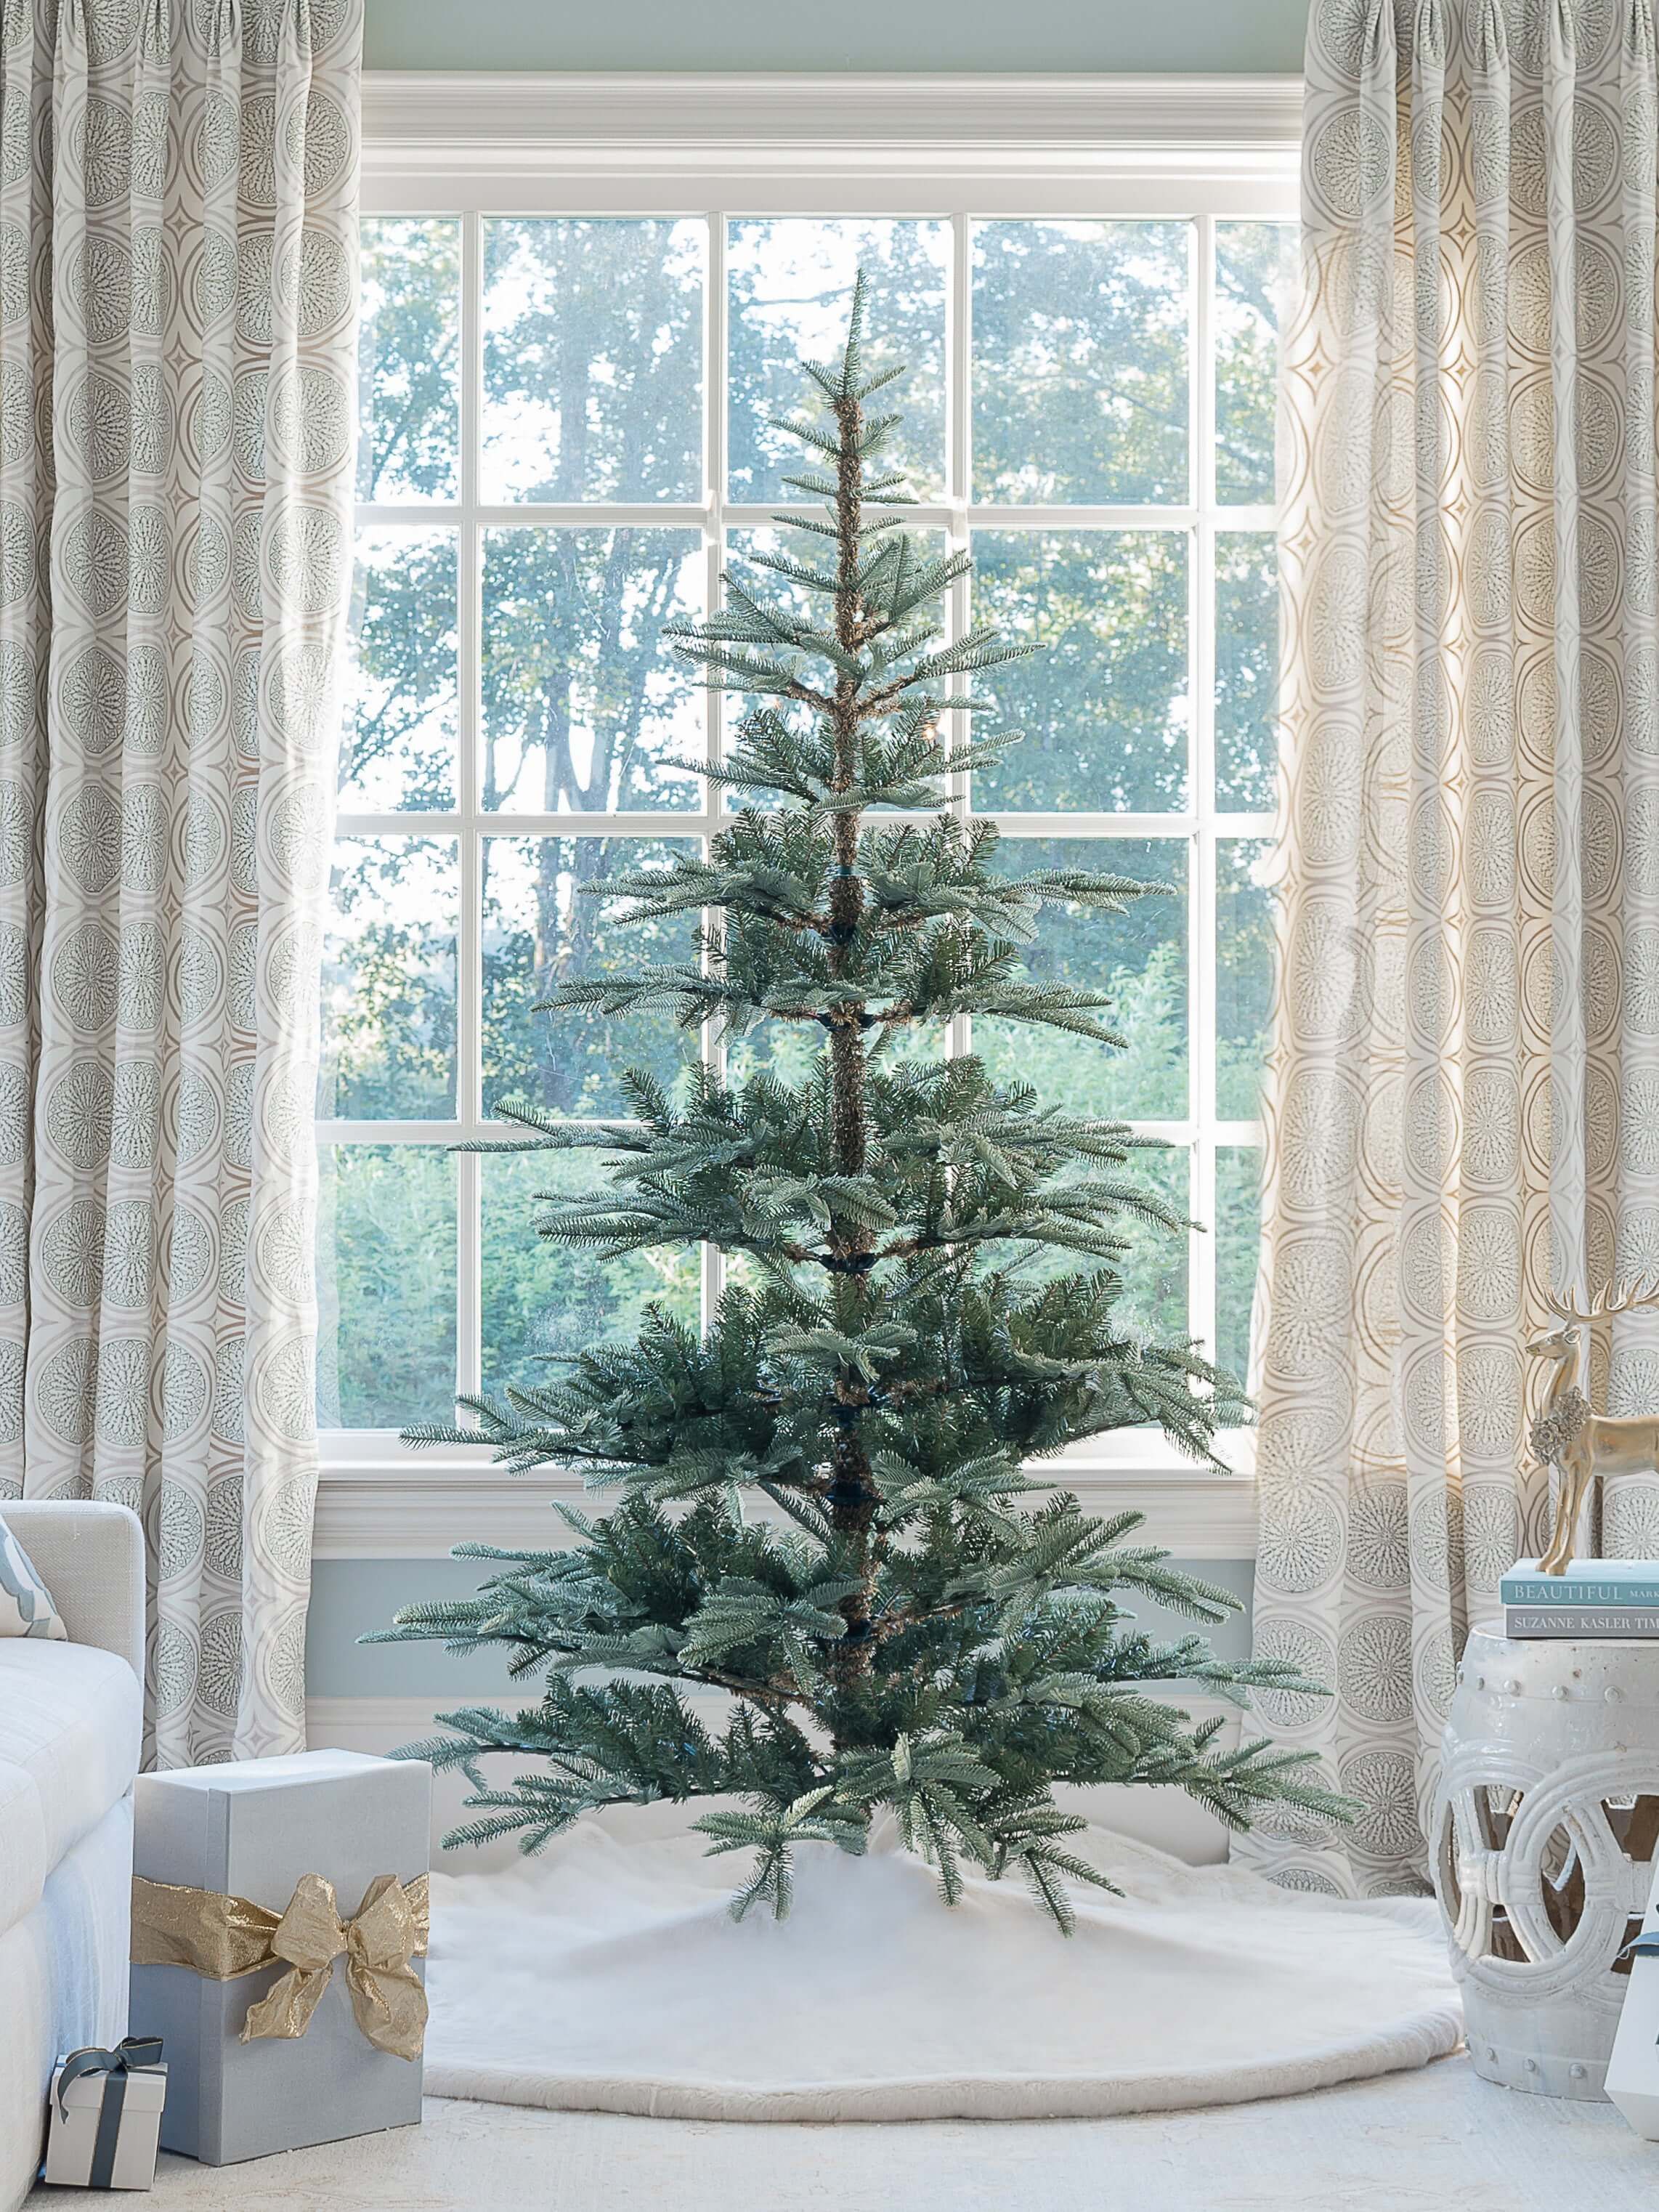 6 Foot King Noble Fir Artificial Christmas Tree Unlit | King of Christmas